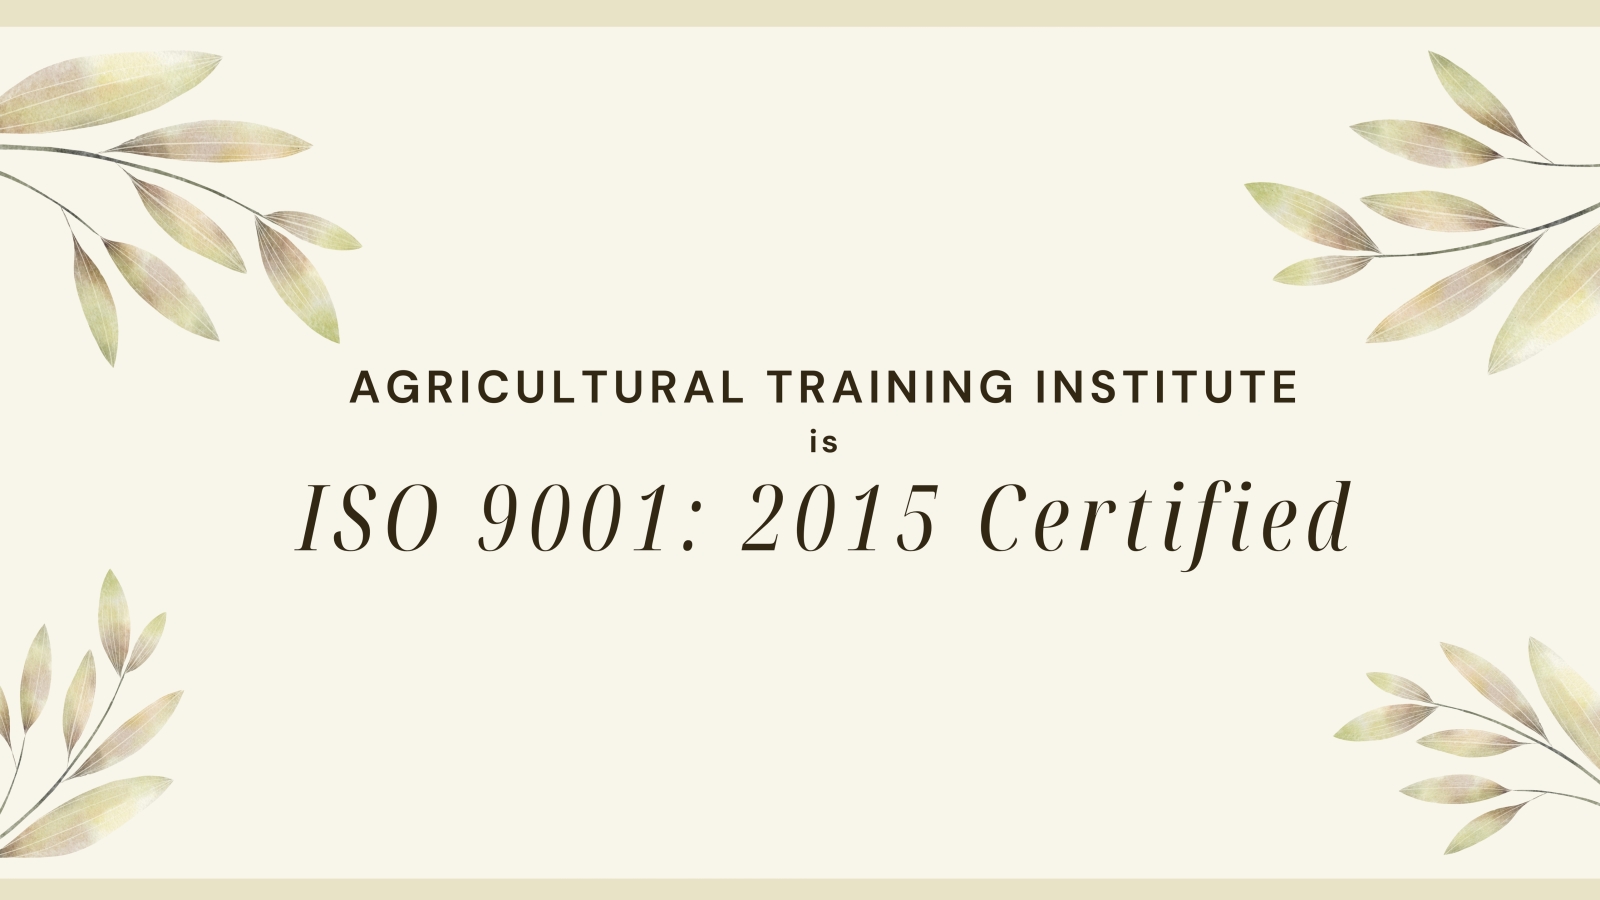 Agricultural Training Institute is ISO 9001:2015 Certified